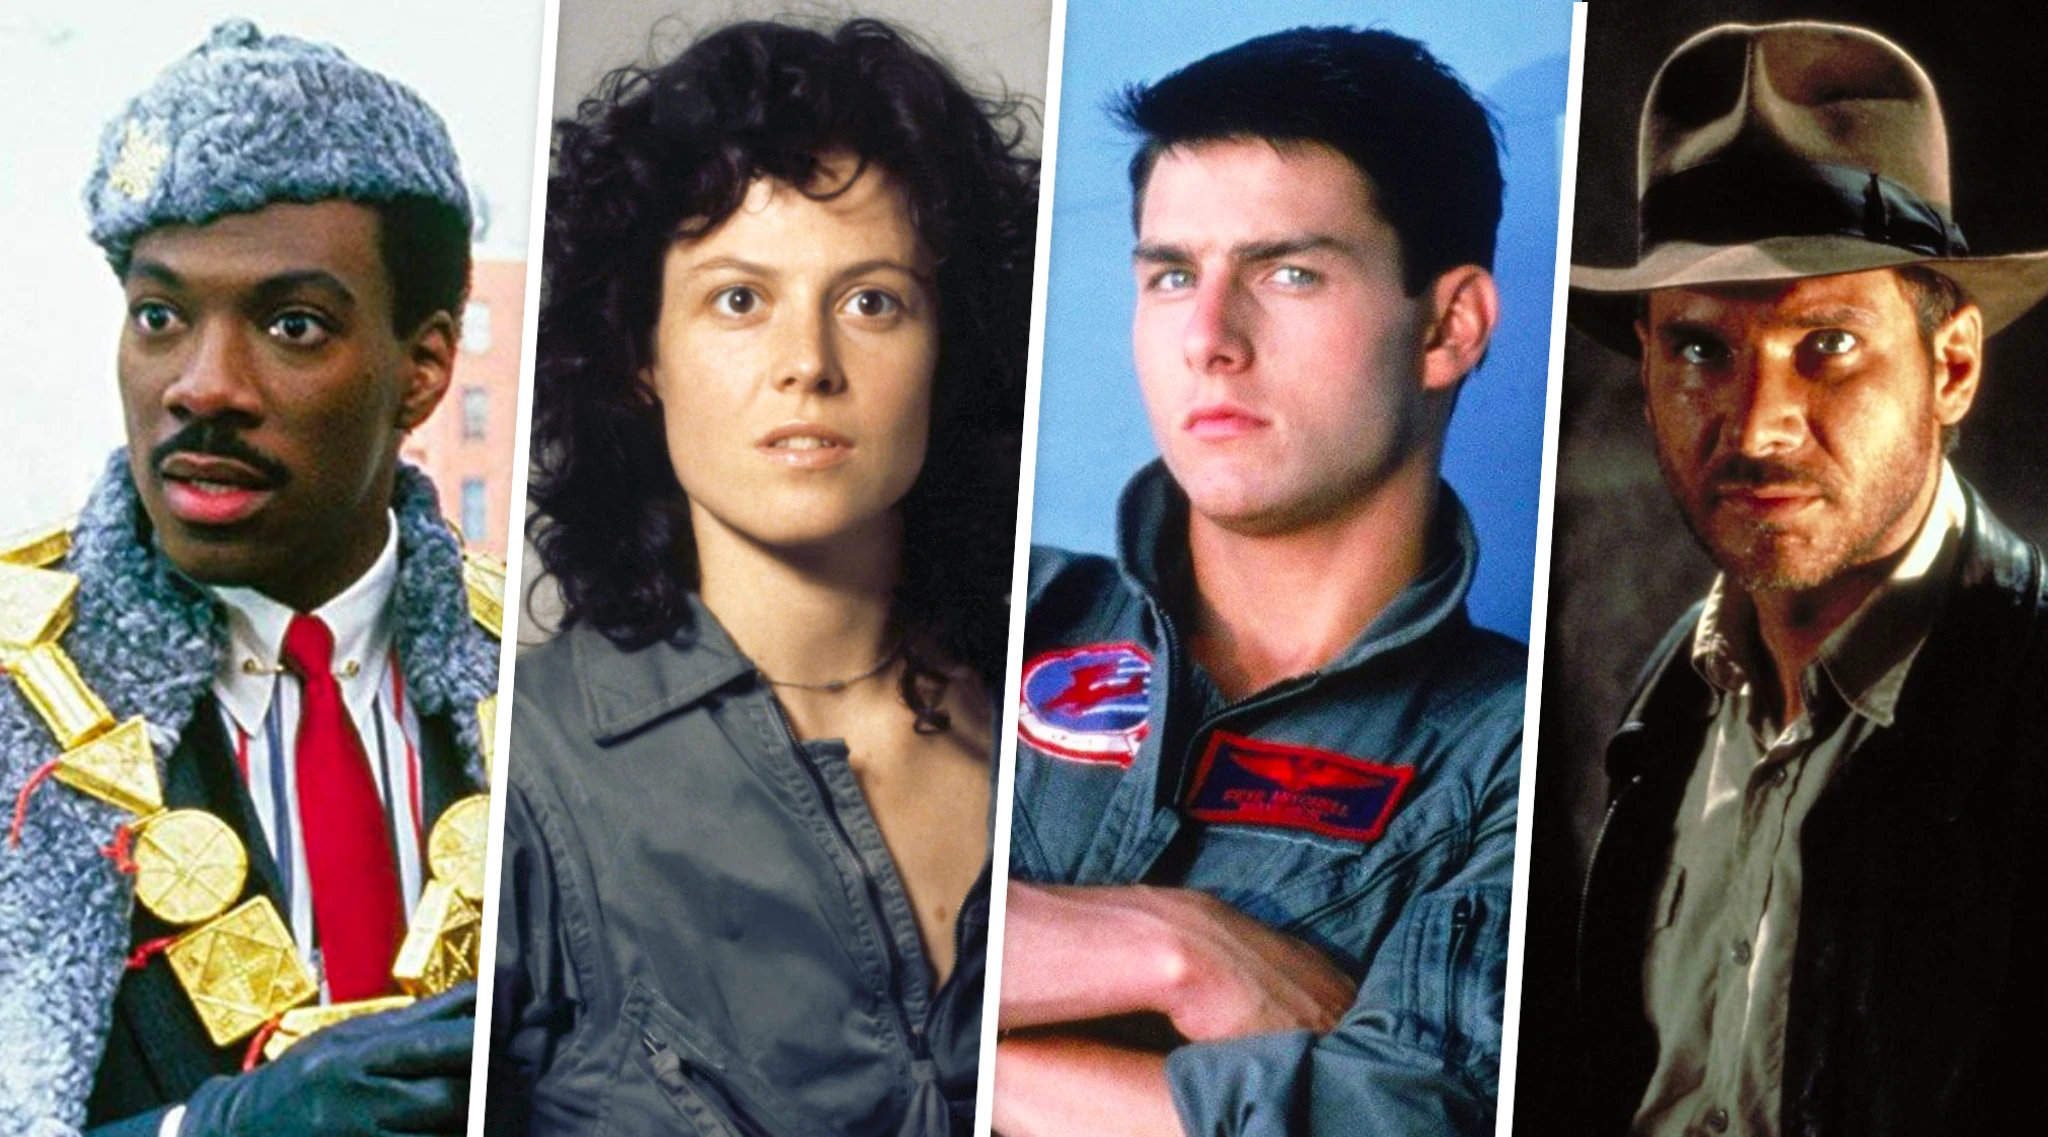 Summer Blockbuster Movies from the '80s: 'Coming to America,' 'Aliens,' 'Top Gun' and More